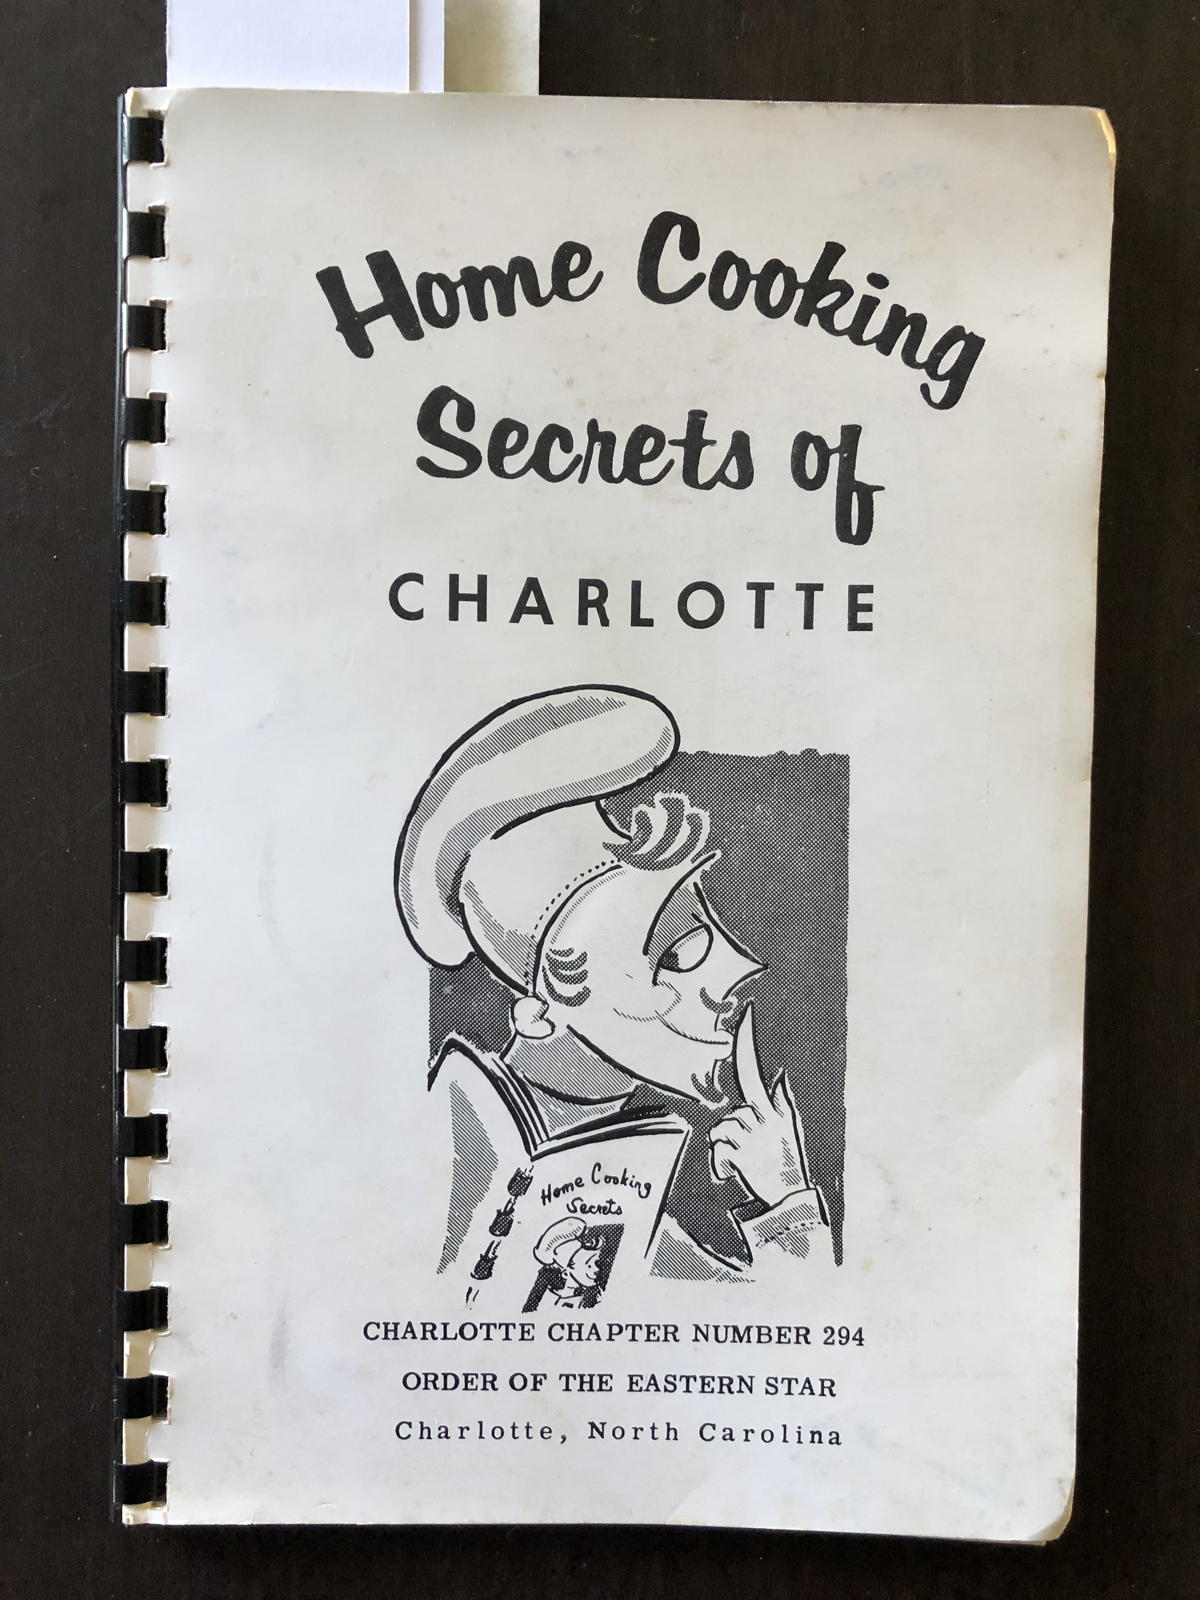 Home Cooking Secrets of Charlotte: Cover for the ca. 1959 Home Cooking Secrets of Charlotte, cookbook of the Order of the Eastern Star, Charlotte, North Carolina.; cookbooks; North Carolina